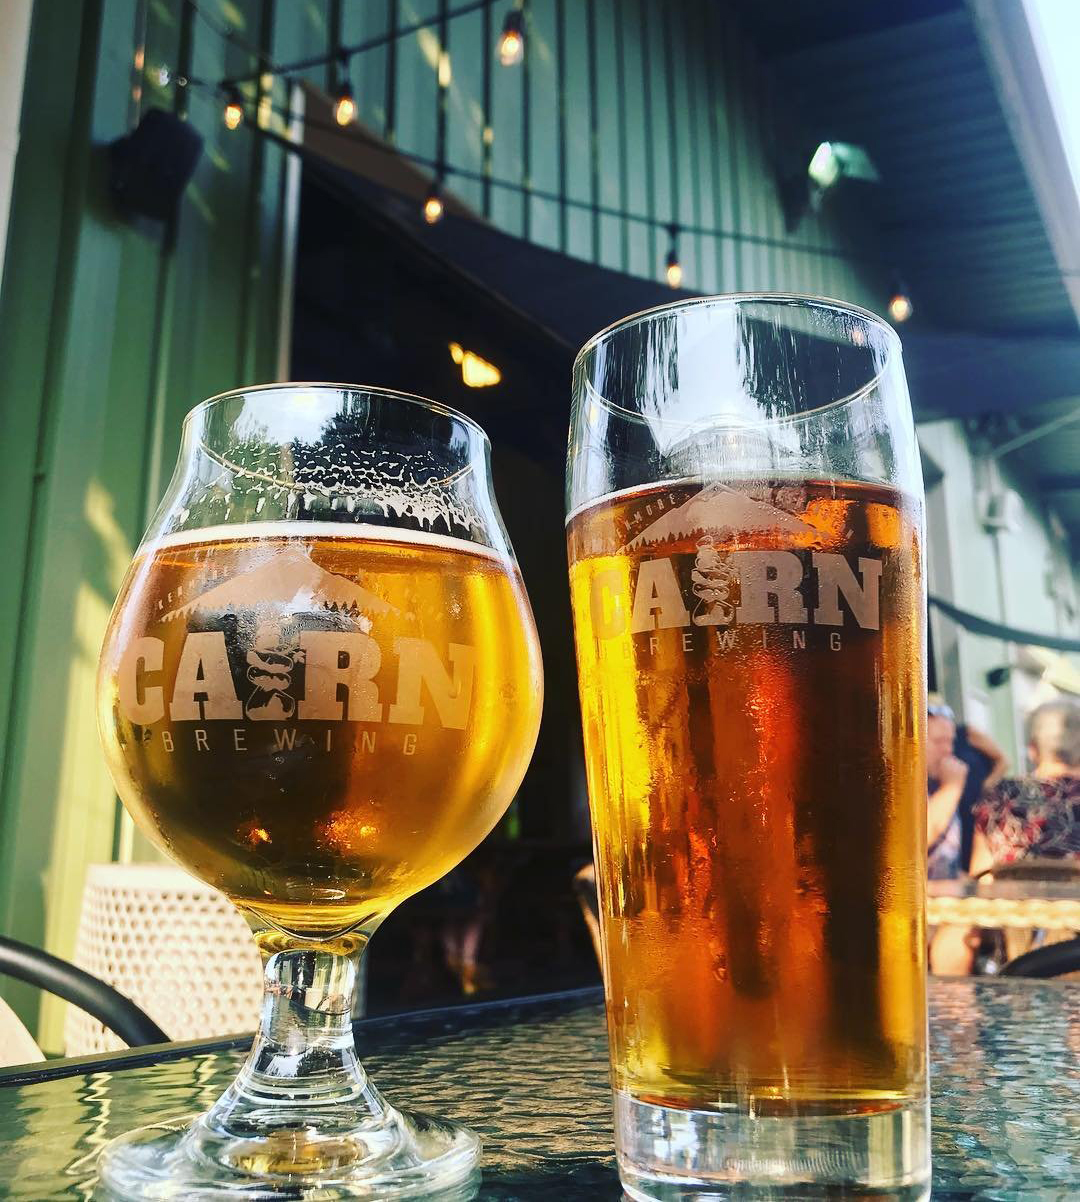 Glasses of beer on a table outside of Carin Brewing near Bothell, Washington.